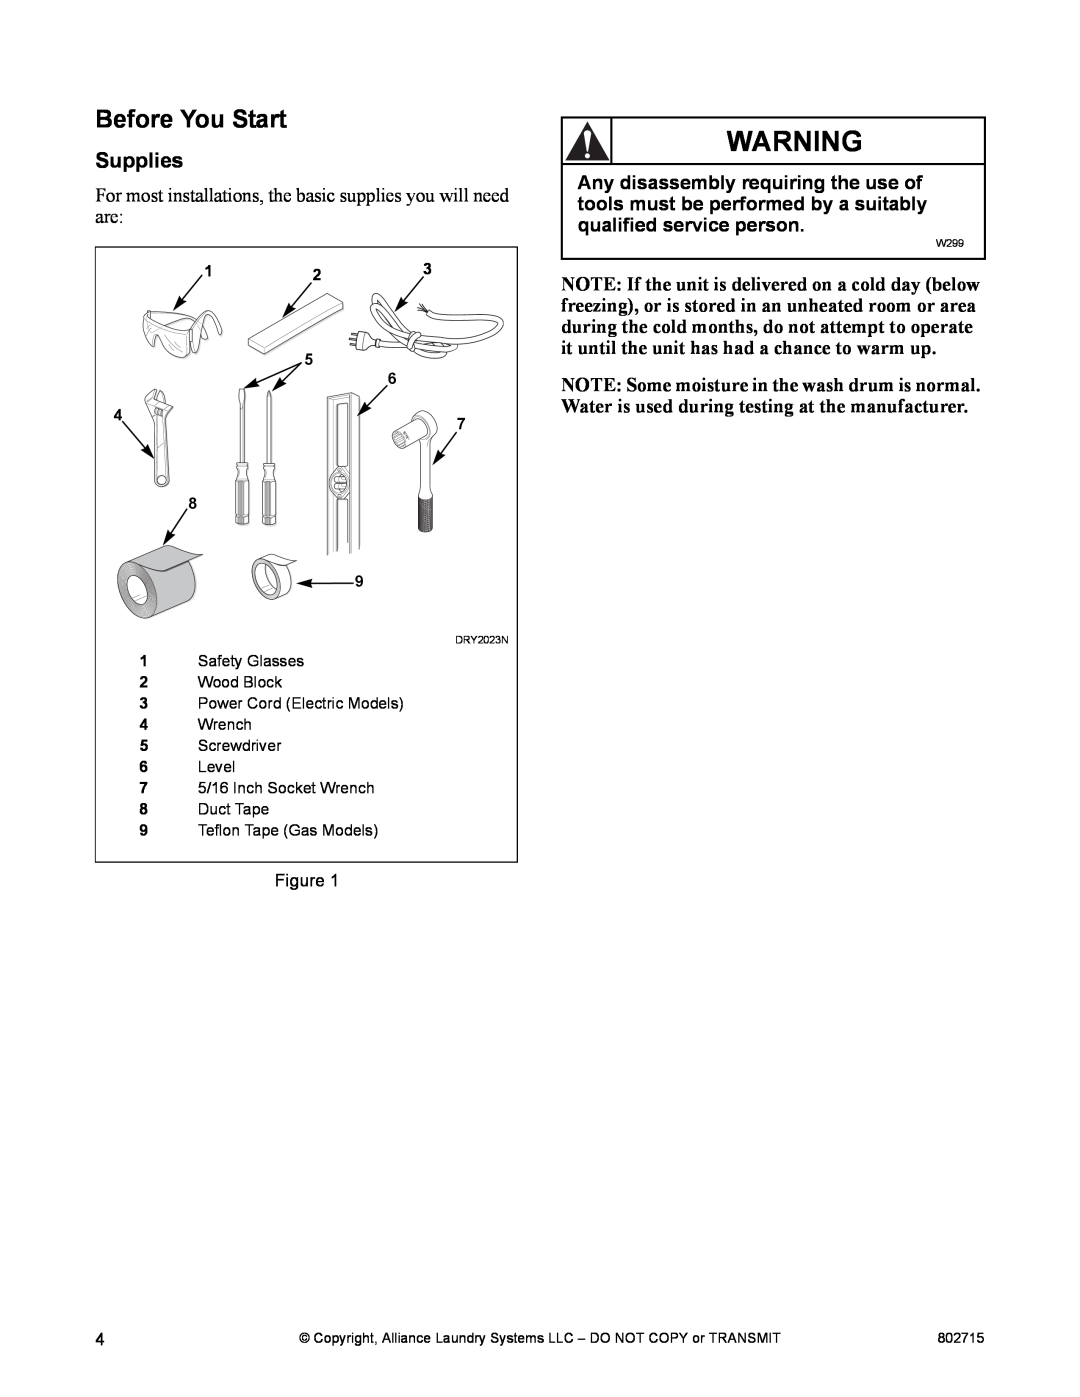 Alliance Laundry Systems Dishwasher manual Before You Start, Supplies 